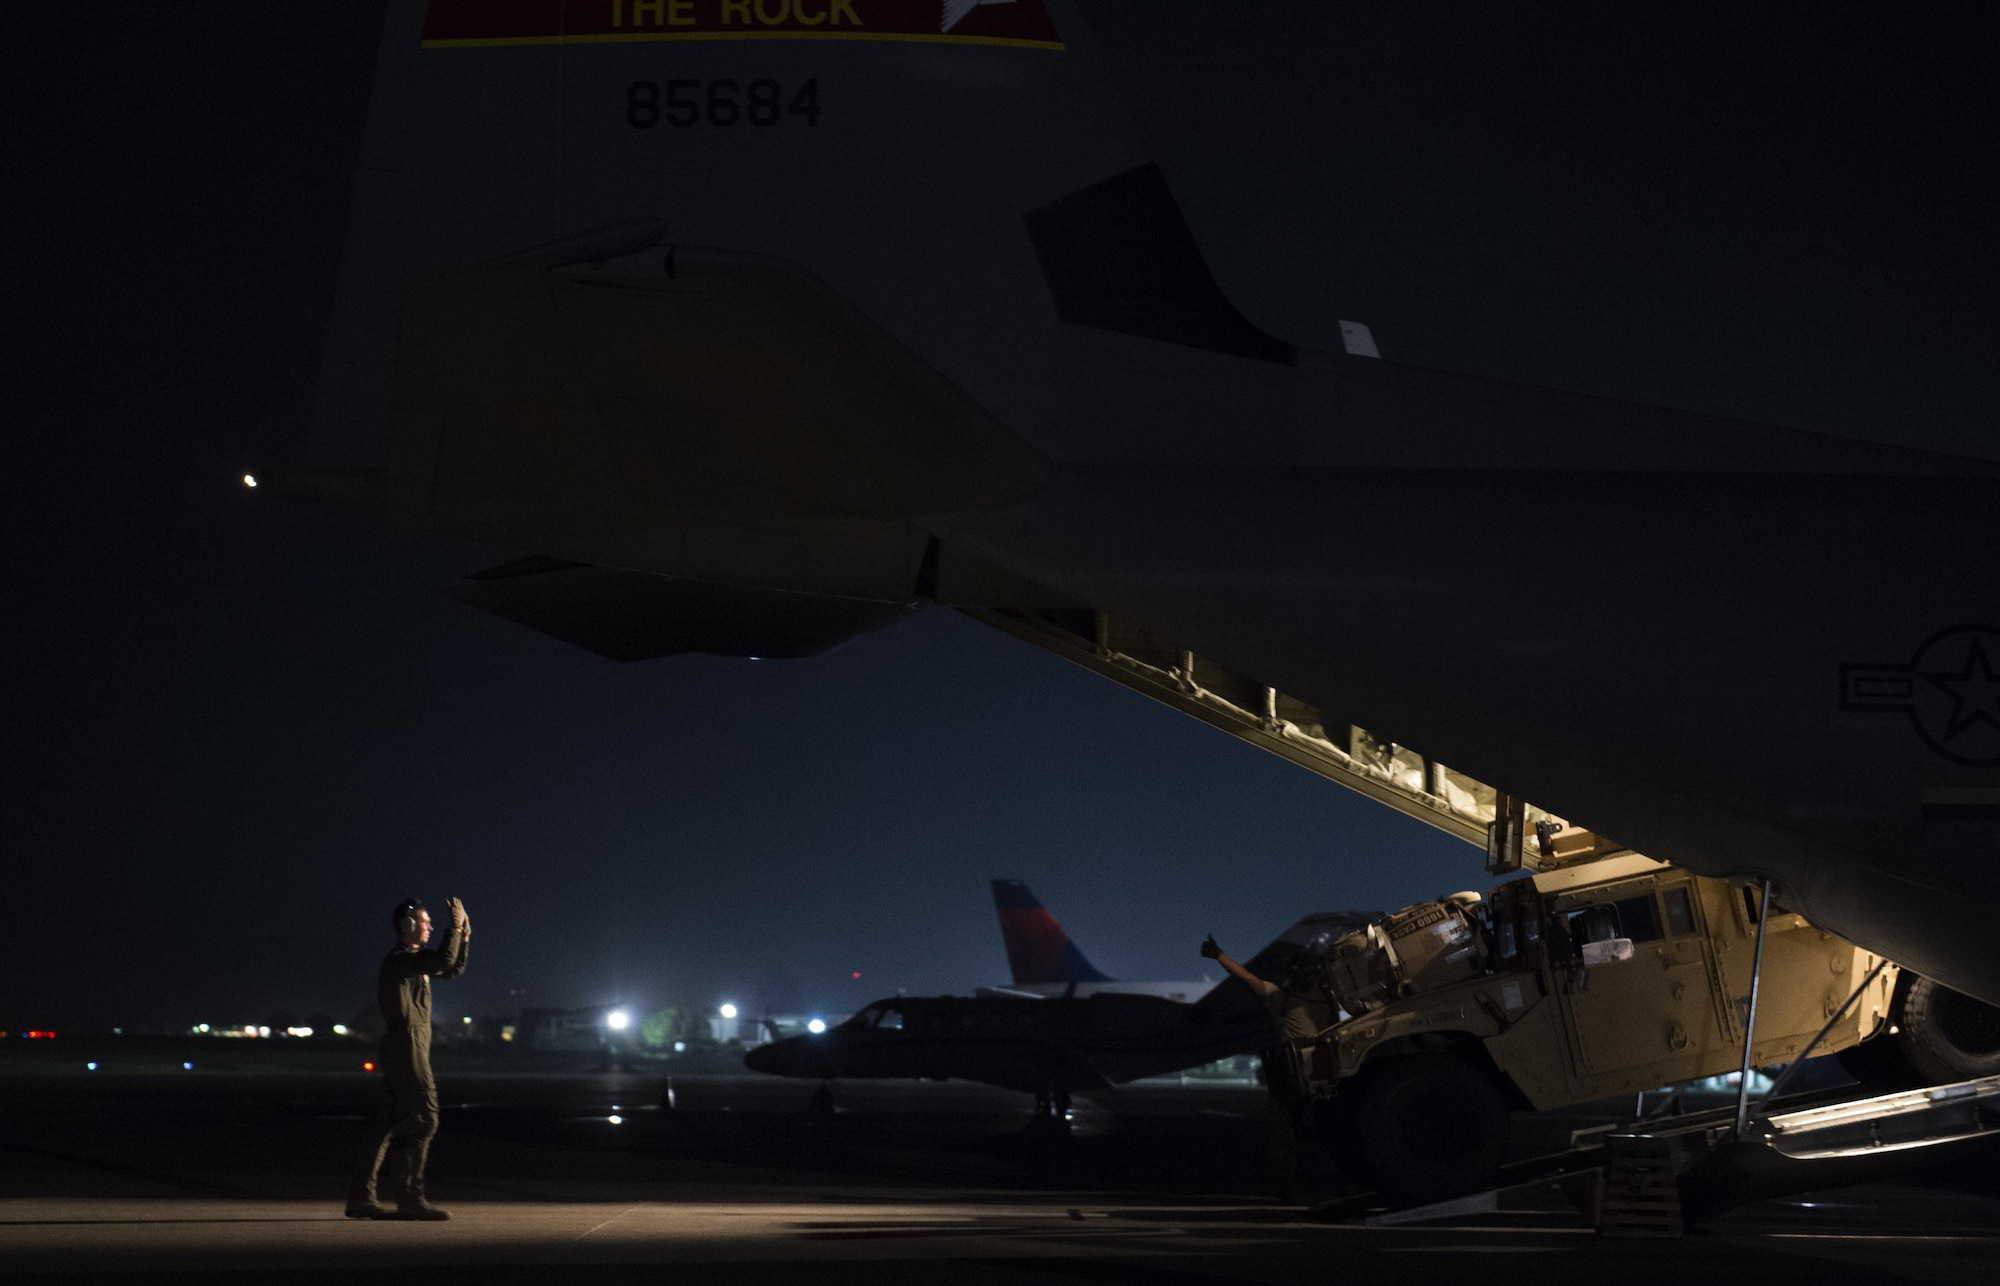 Staff Sgt. Michael Henry, a 61st Airlift Squadron loadmaster, guides the removal of a pallet out of a C-130J Super Hercules on an airstrip in Port-au-Prince, Haiti, Oct. 9, 2016. Airmen from the 61st AS worked alongside several other units in Haiti to support humanitarian relief efforts. (U.S. Air Force photo/Staff Sgt. Paul Labbe)